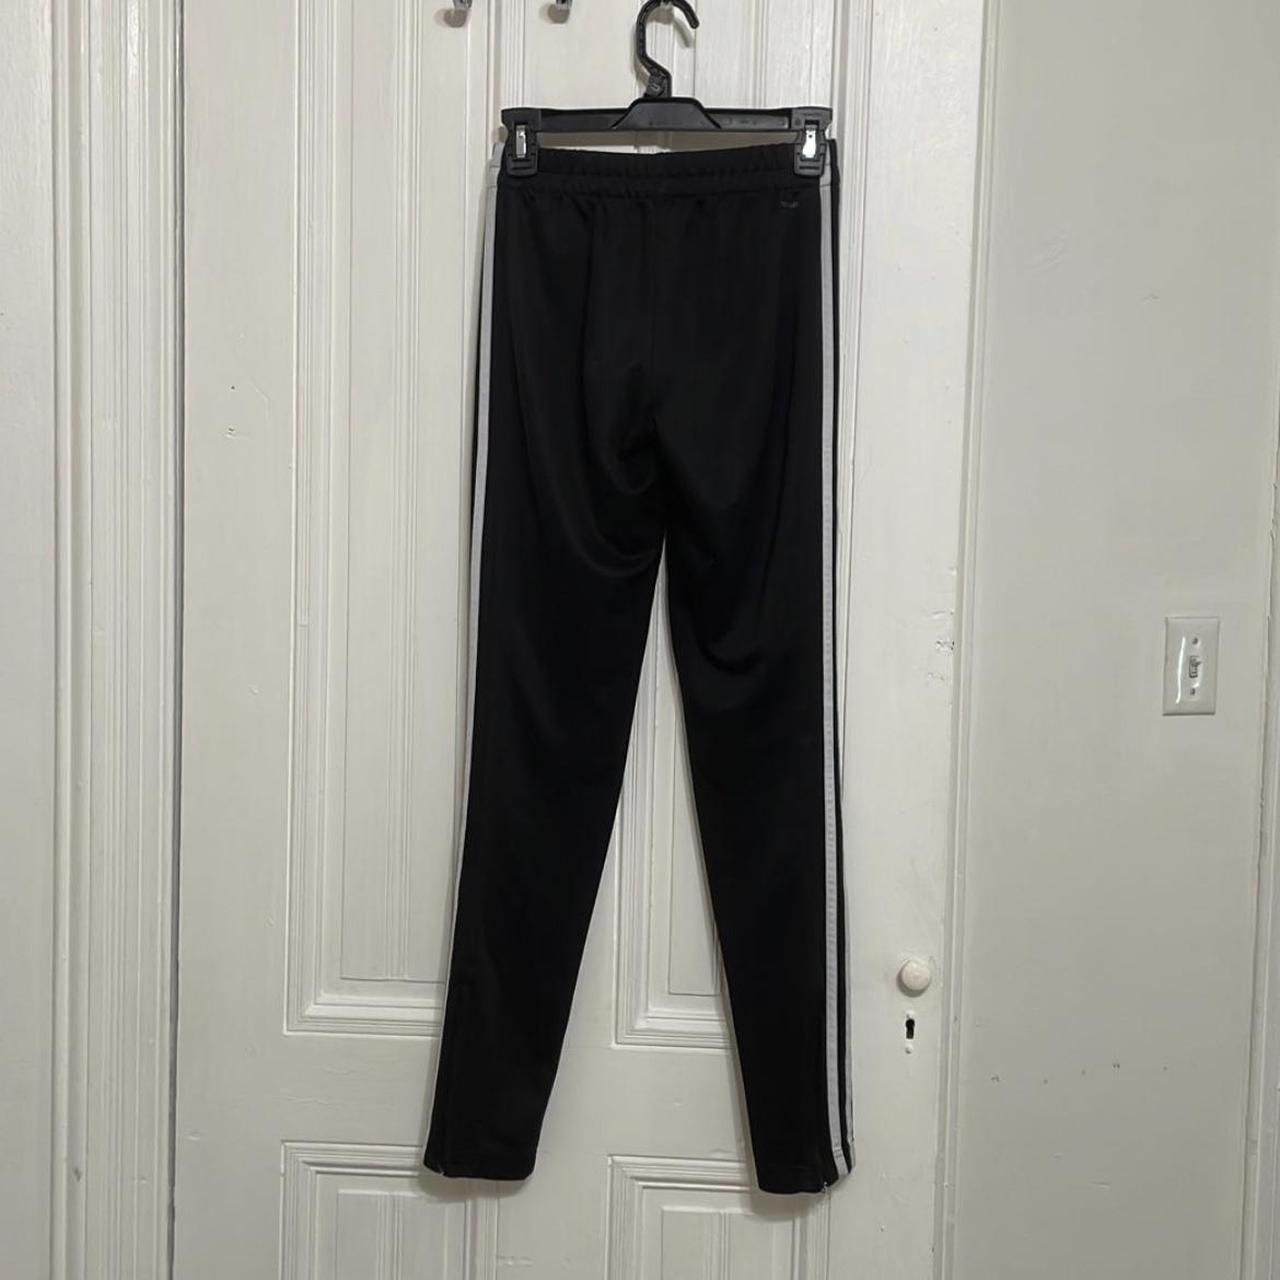 Adidas Women's Black and White Joggers-tracksuits (2)